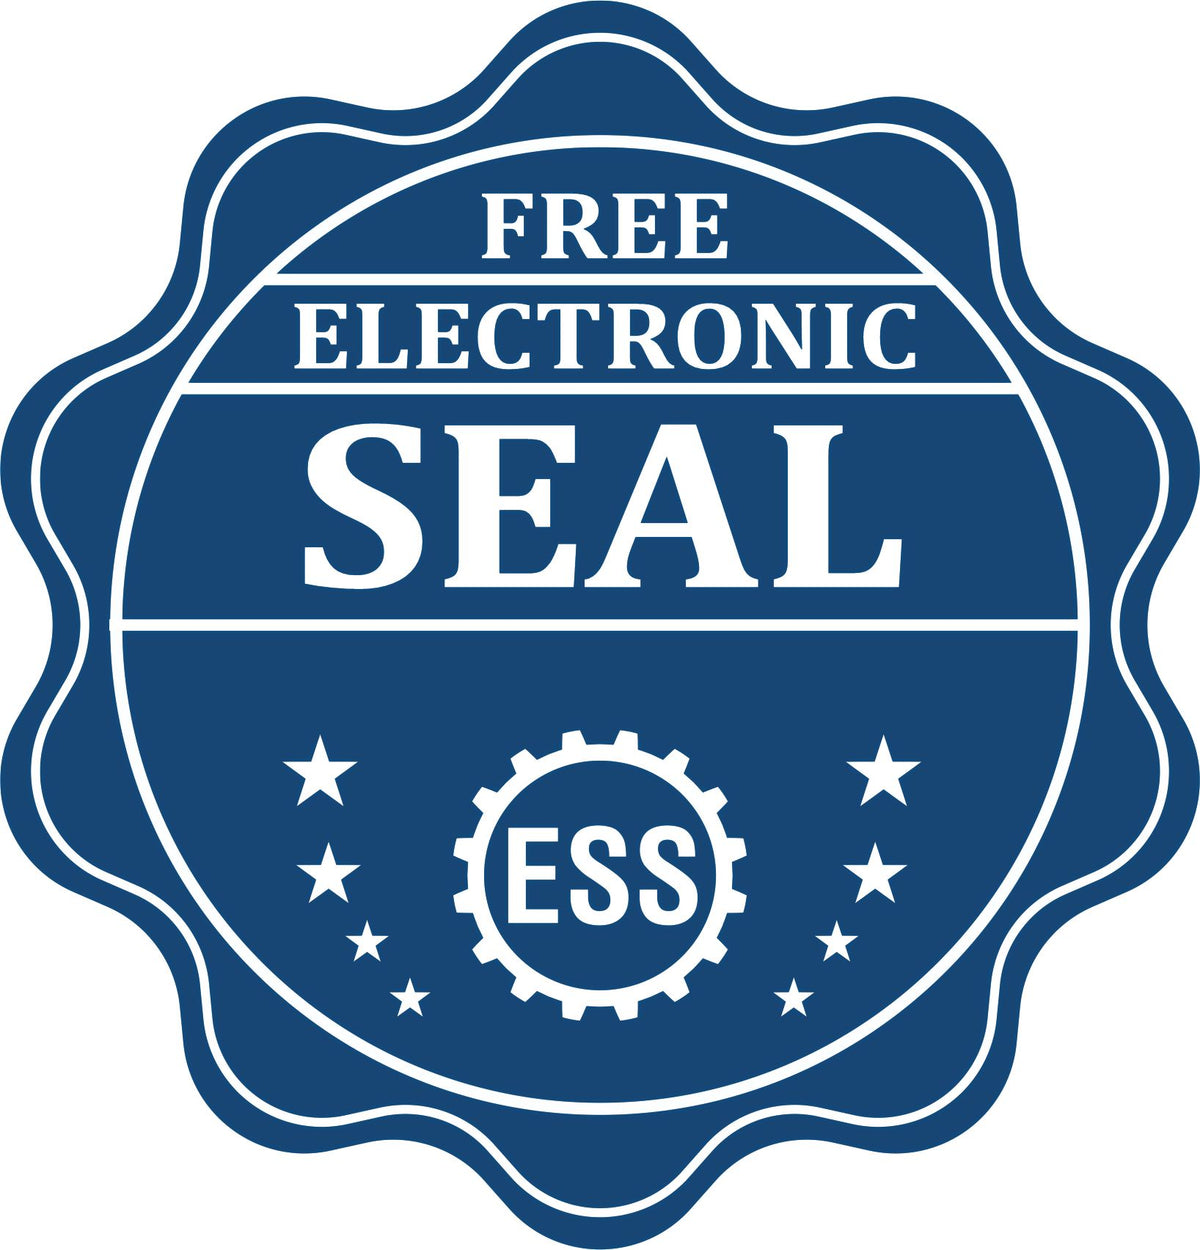 A badge showing a free electronic seal for the Hybrid New Mexico Geologist Seal with stars and the ESS gear on the emblem.